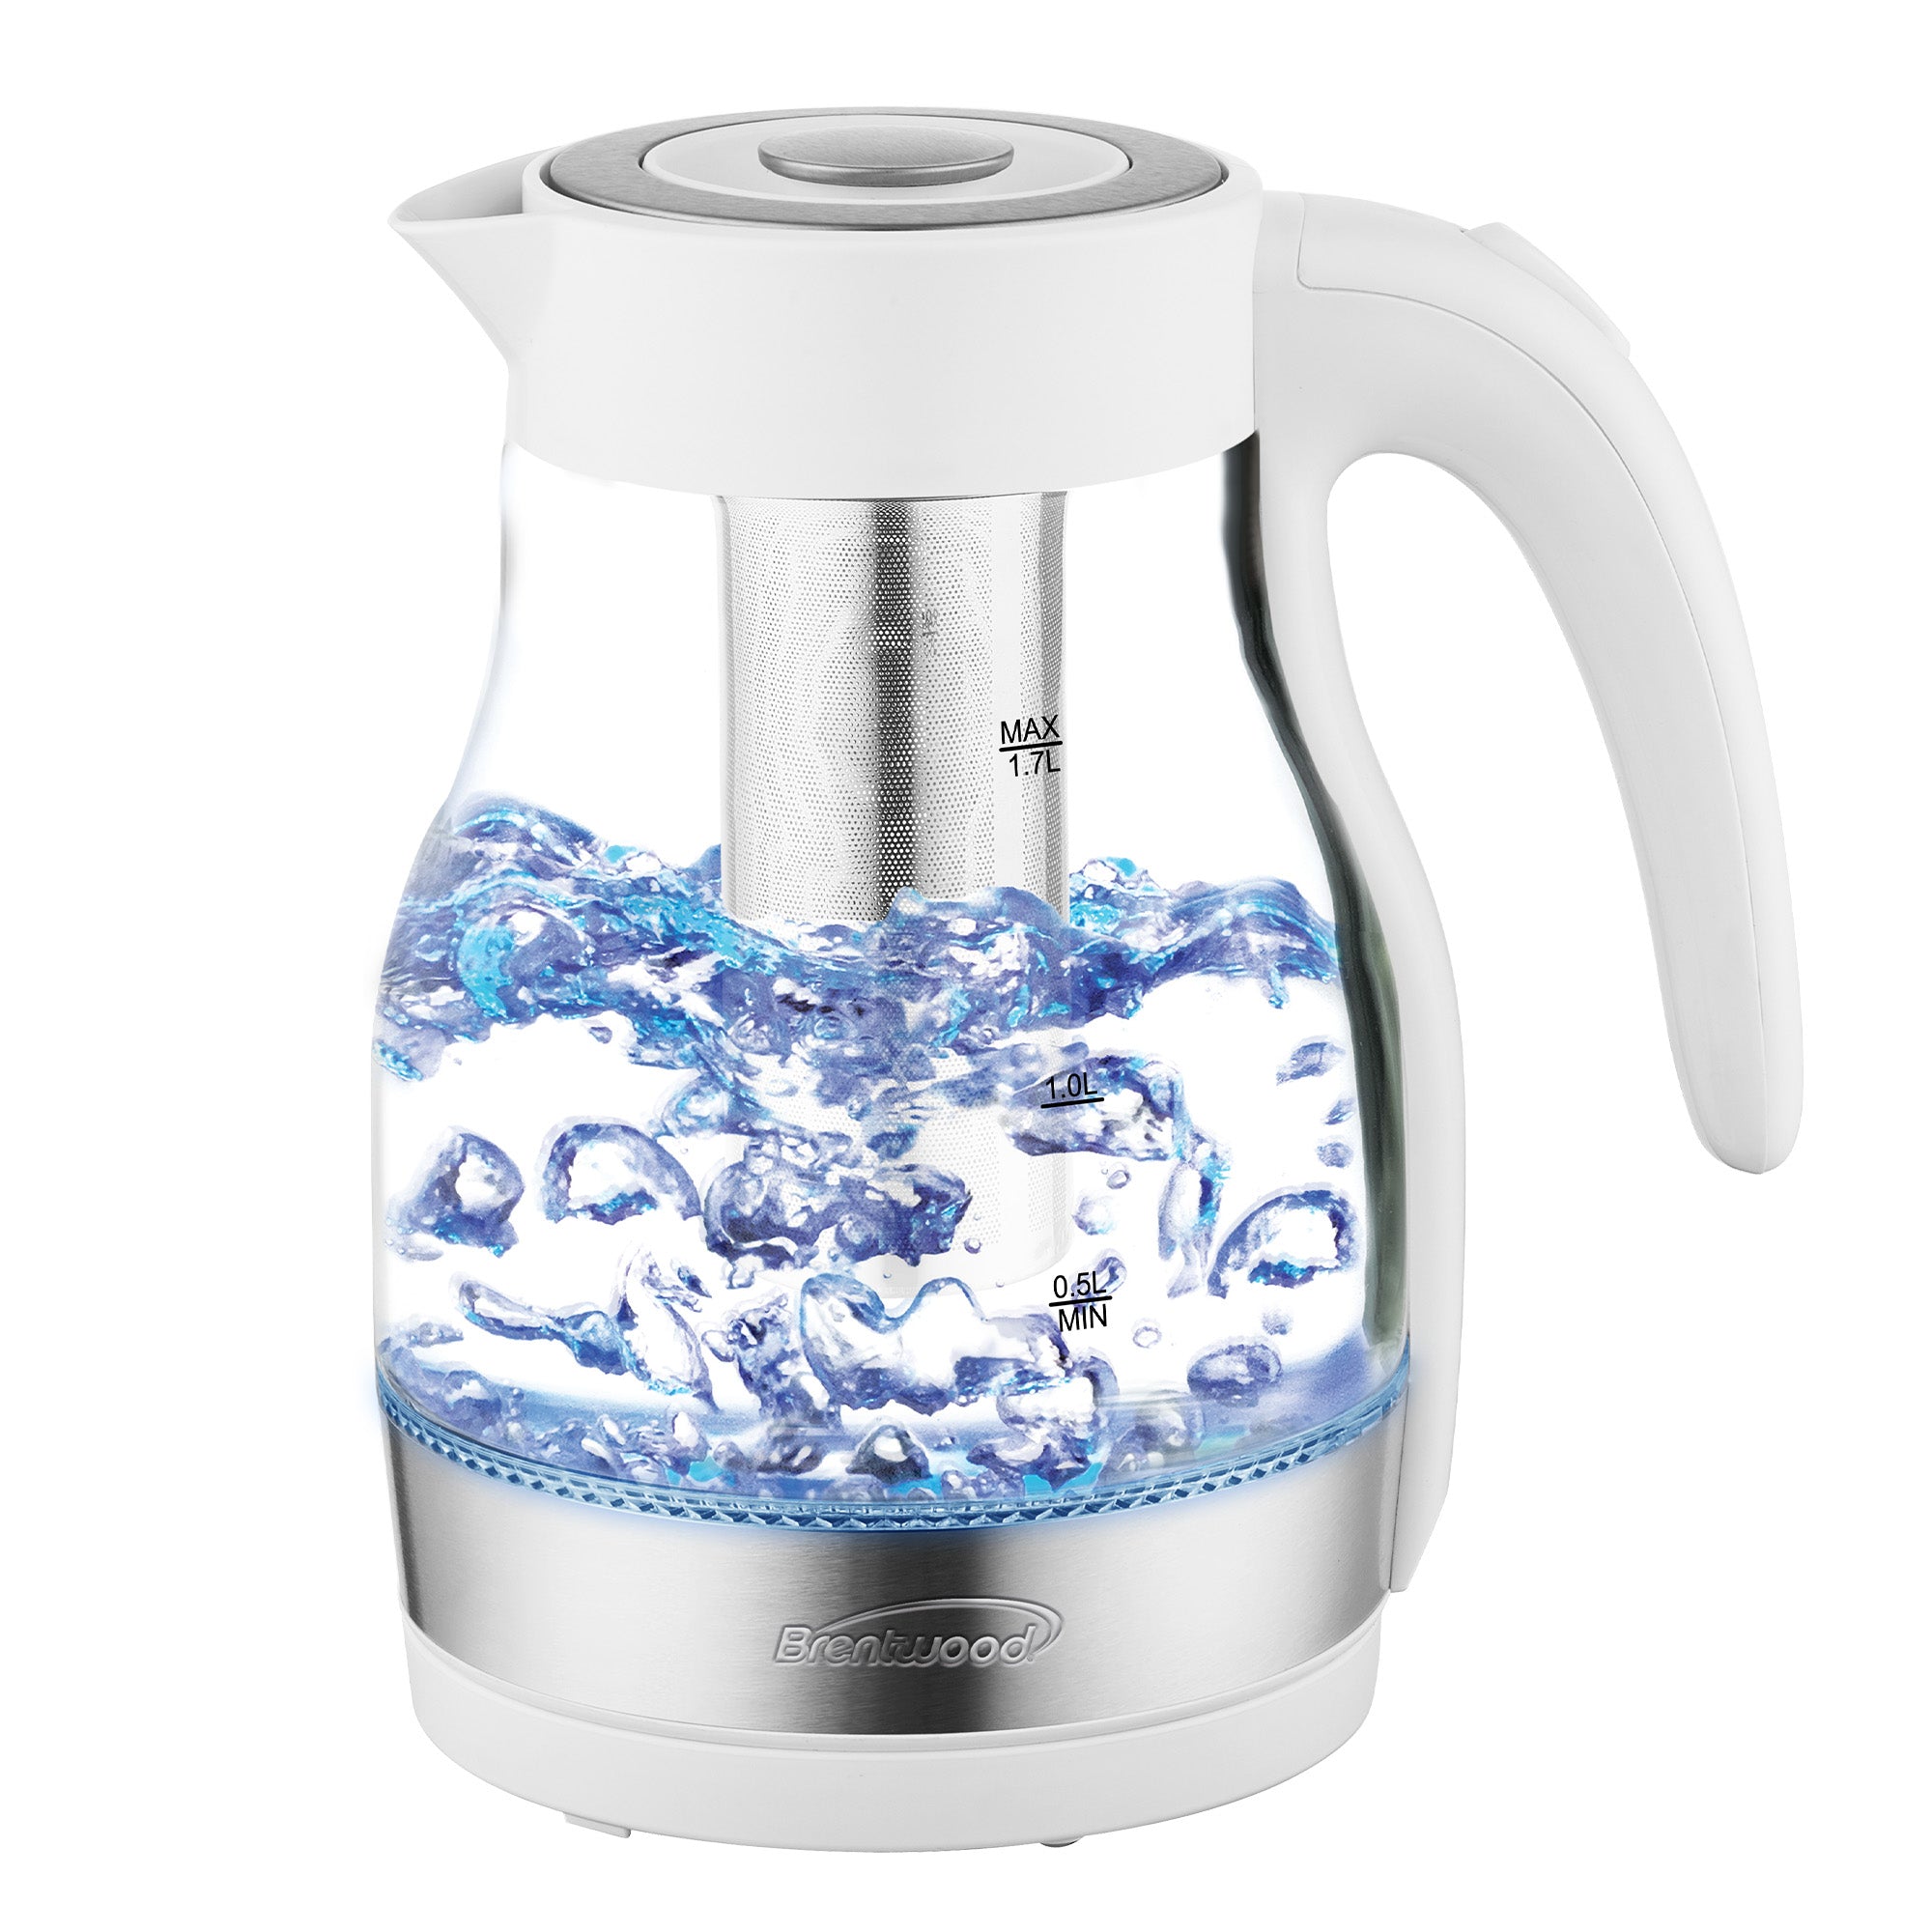 White Stainless Steel Cordless Electric Kettle